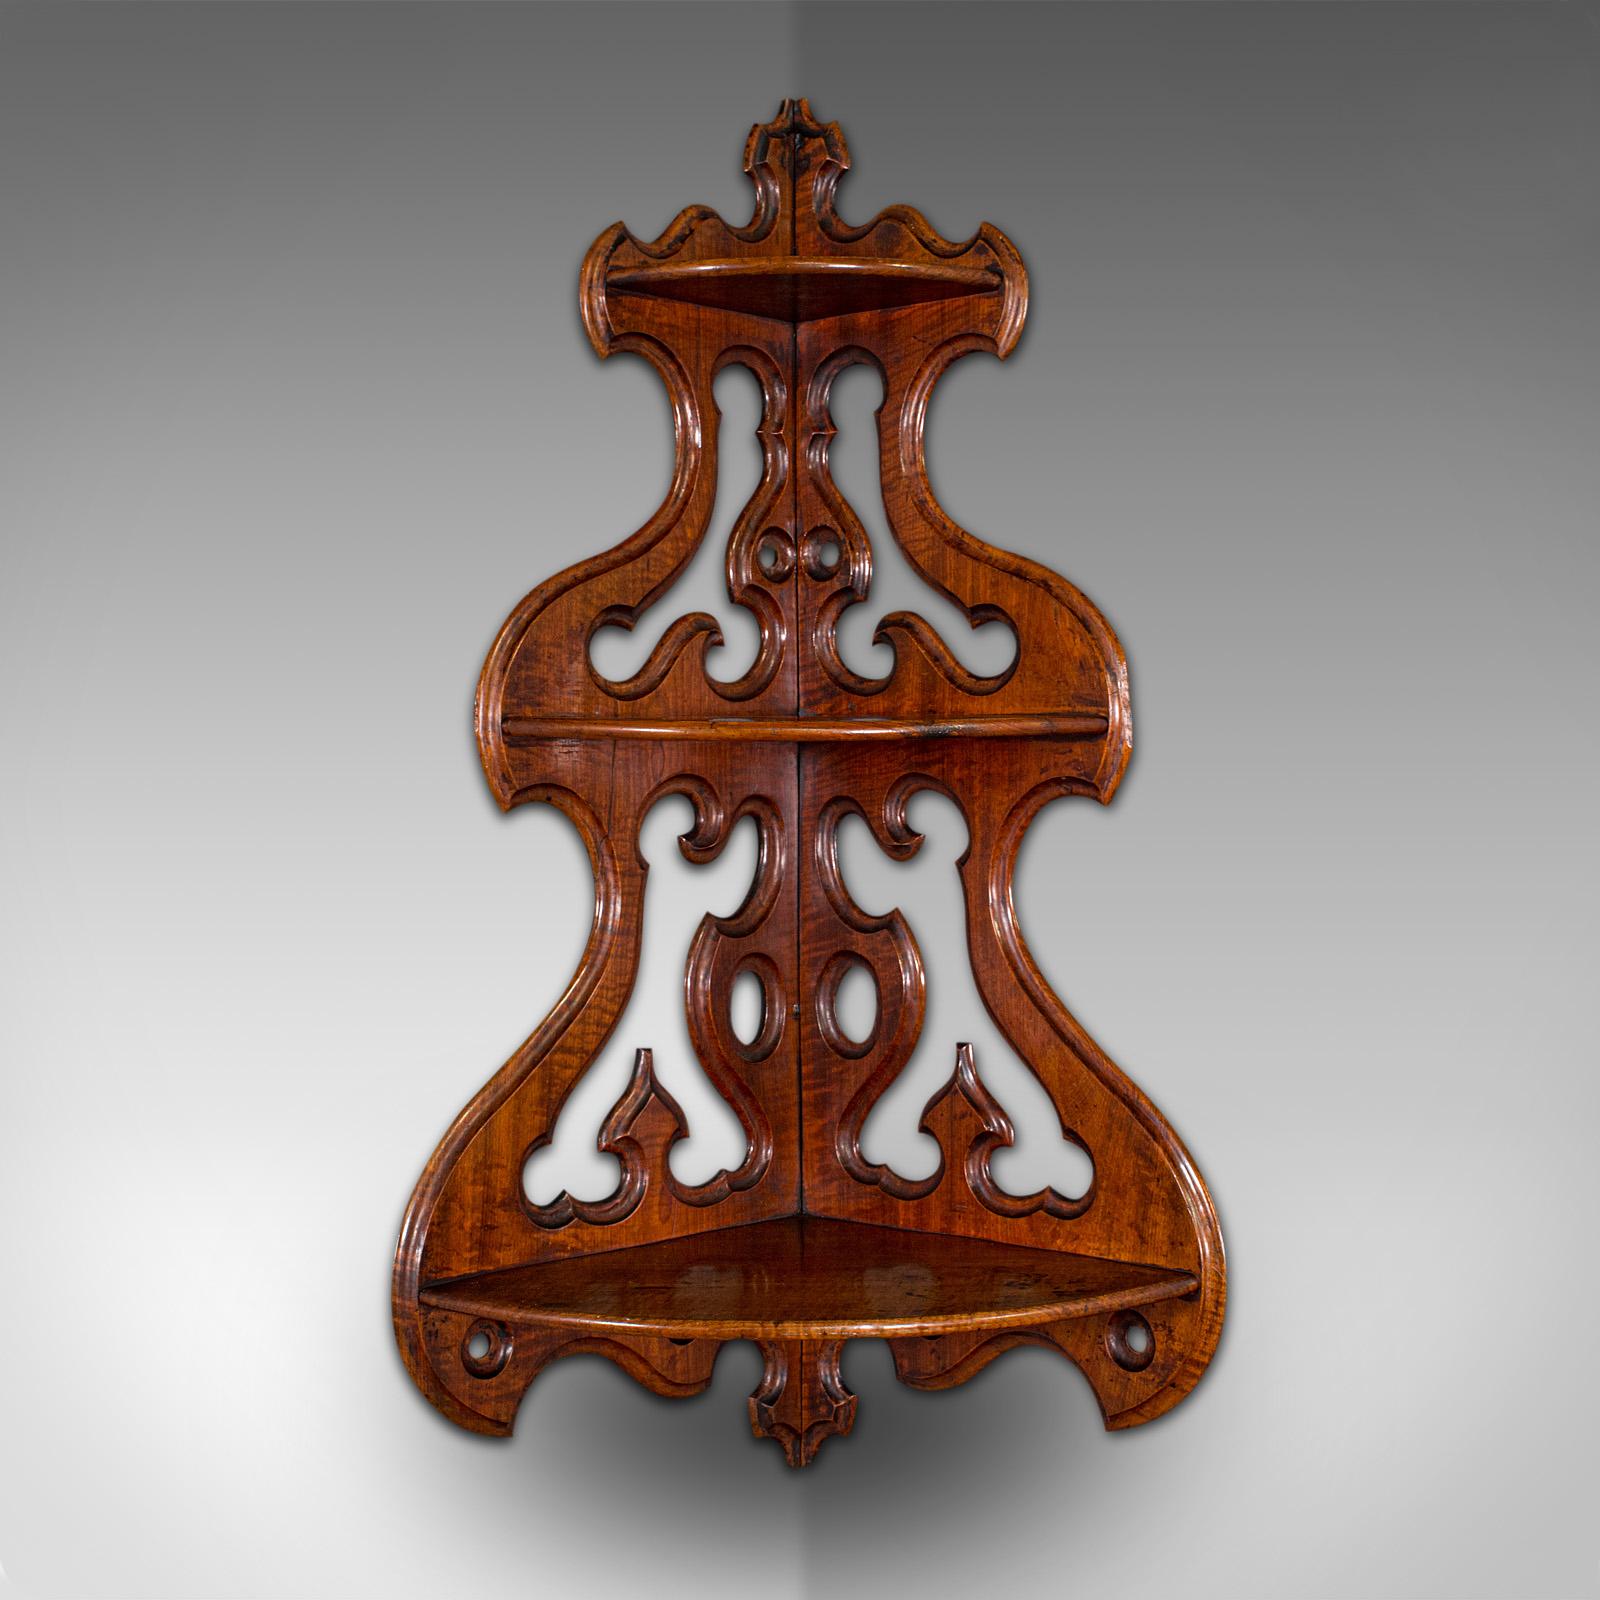 This is an antique three-tier hanging whatnot. An English, walnut corner wall shelf or candle bracket, dating to the early Victorian period, circa 1850.

Distinctive wall mounted corner whatnot with striking form
Displays a desirable aged patina